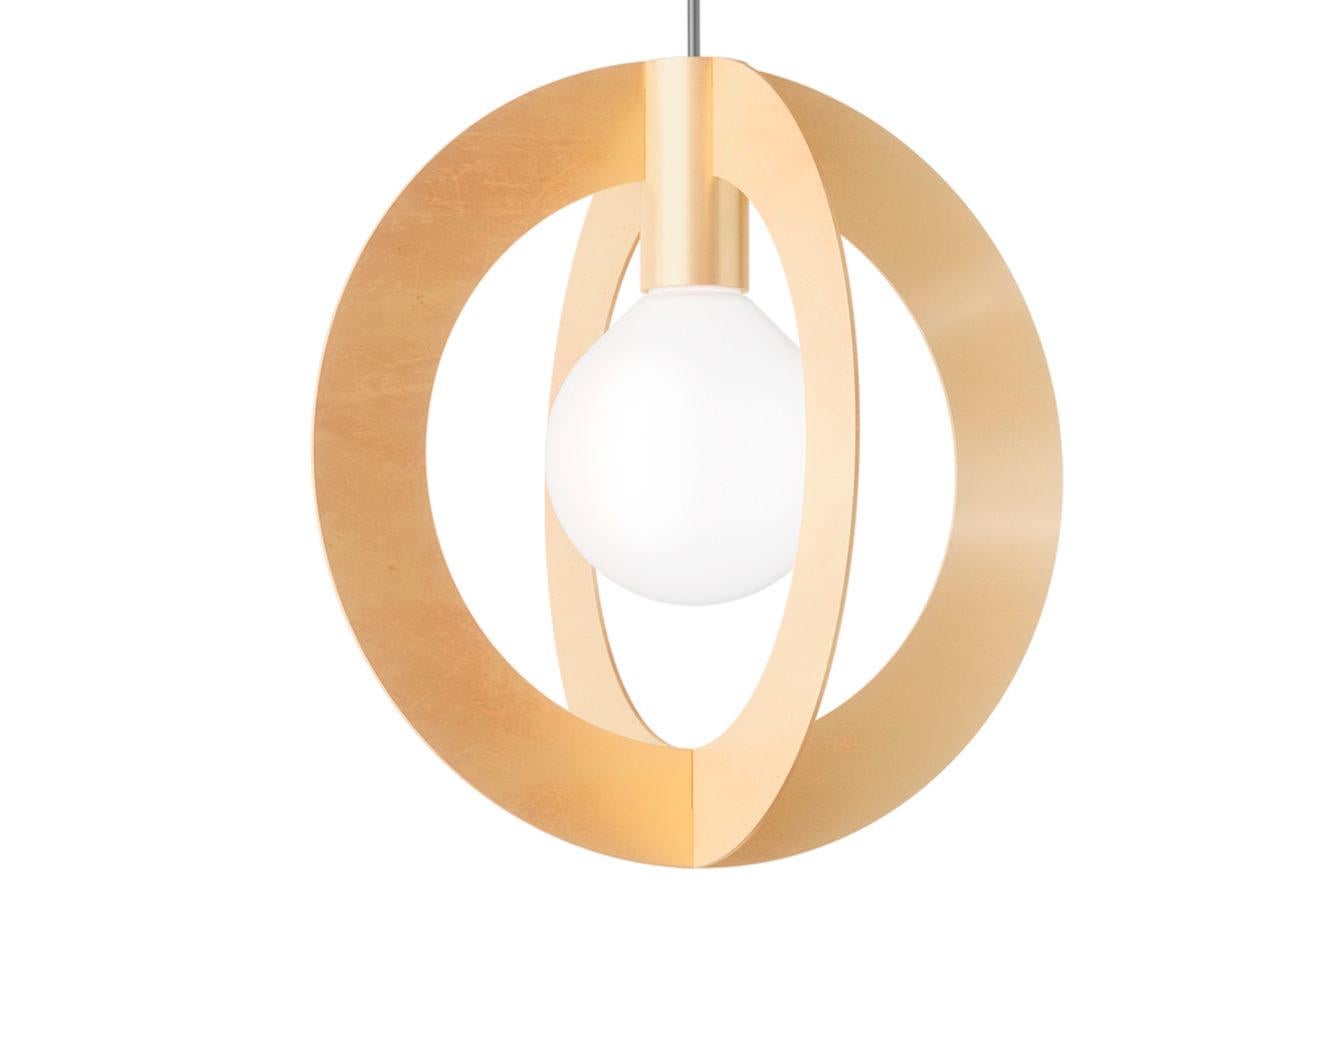 Diaradius 40 is a Minimalist pendant lamp design by Wishnya Design Studio.
Brass finish. 

Measures: D 40cm
LED G9 60W 220V - US compatible
Dimmable
Adjustable wire

Two sizes available 
Two finishes available: copper, brass.